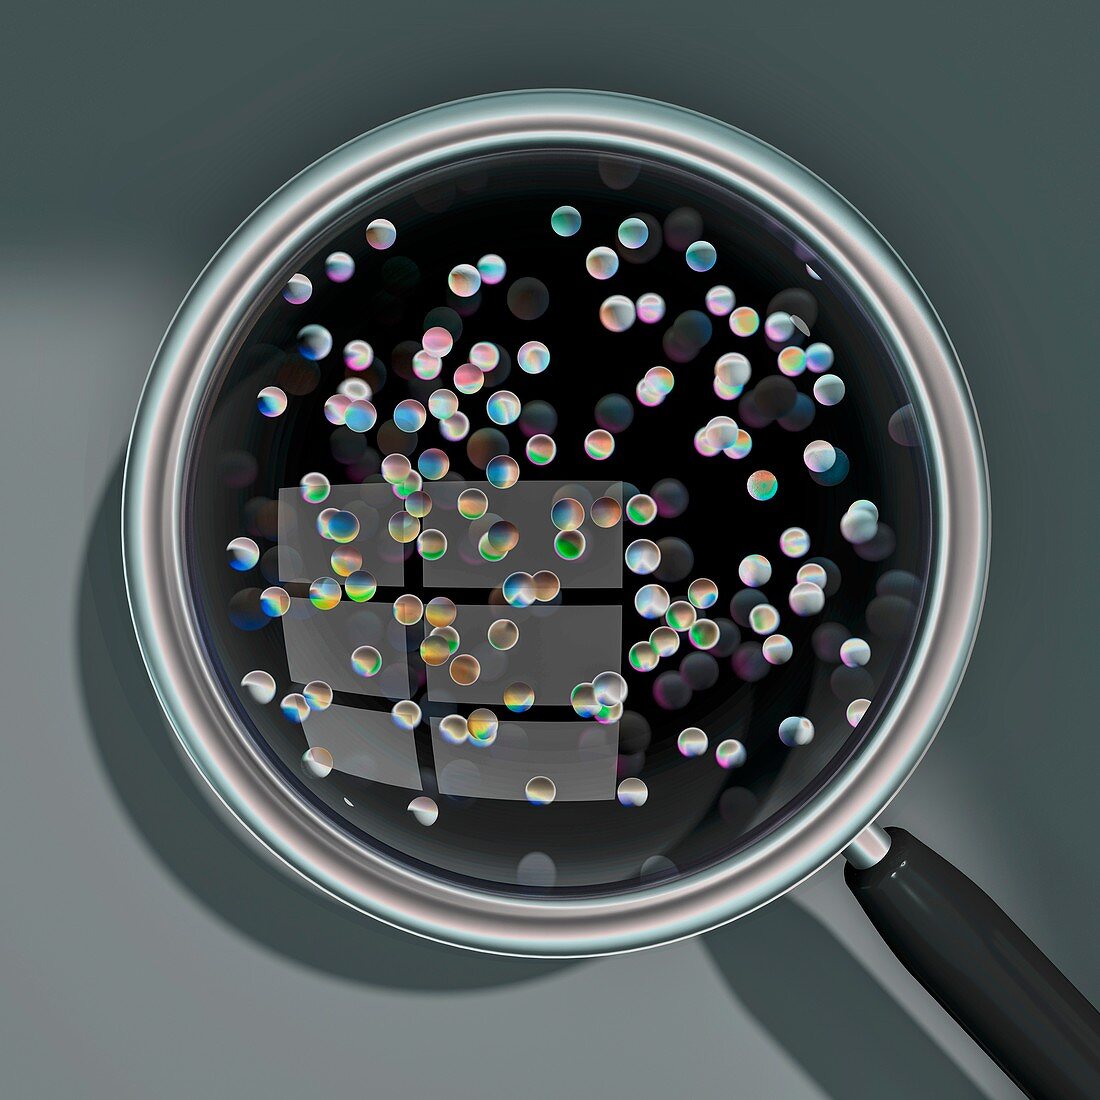 Particles through a magnifying glass, illustration